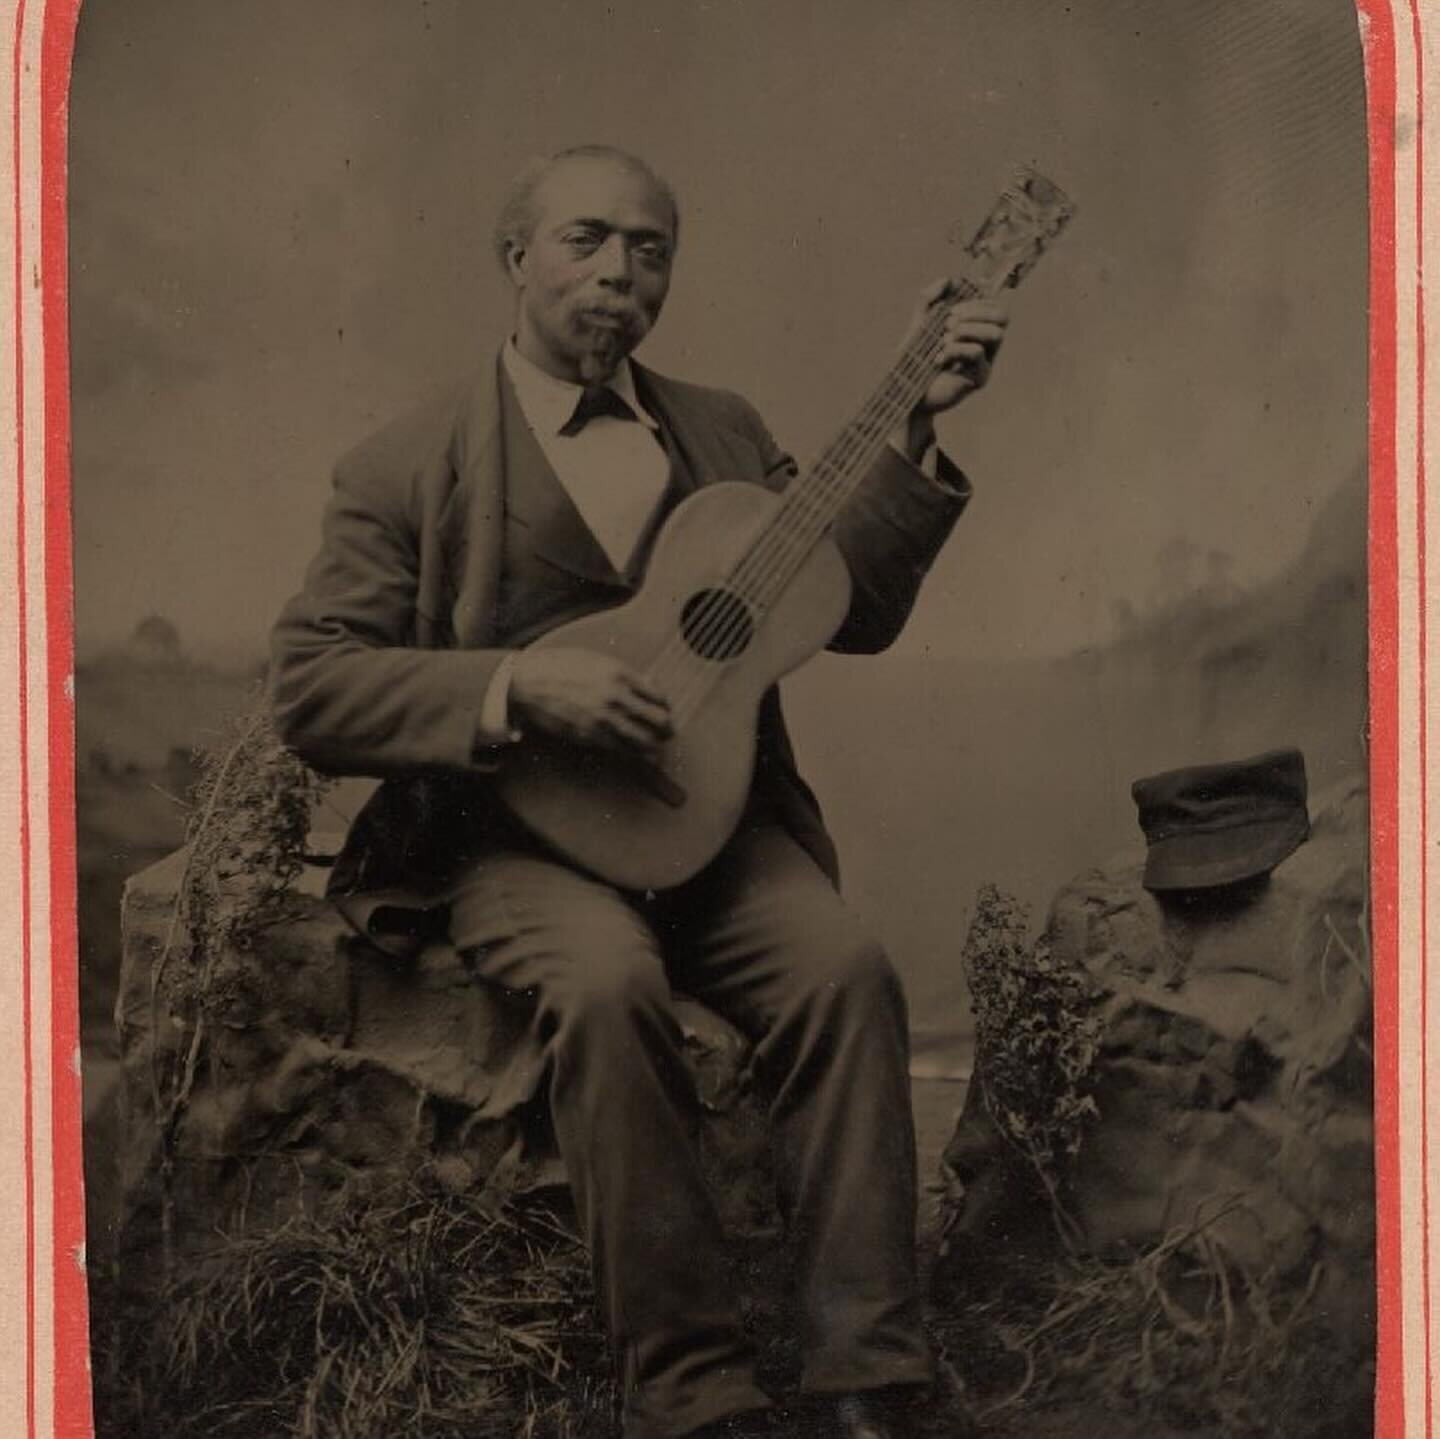 c 1885, decorated studio tintype of a man holding a guitar, with hap resting on adjacent studio prop &mdash;Yale University Library, Digital Collections